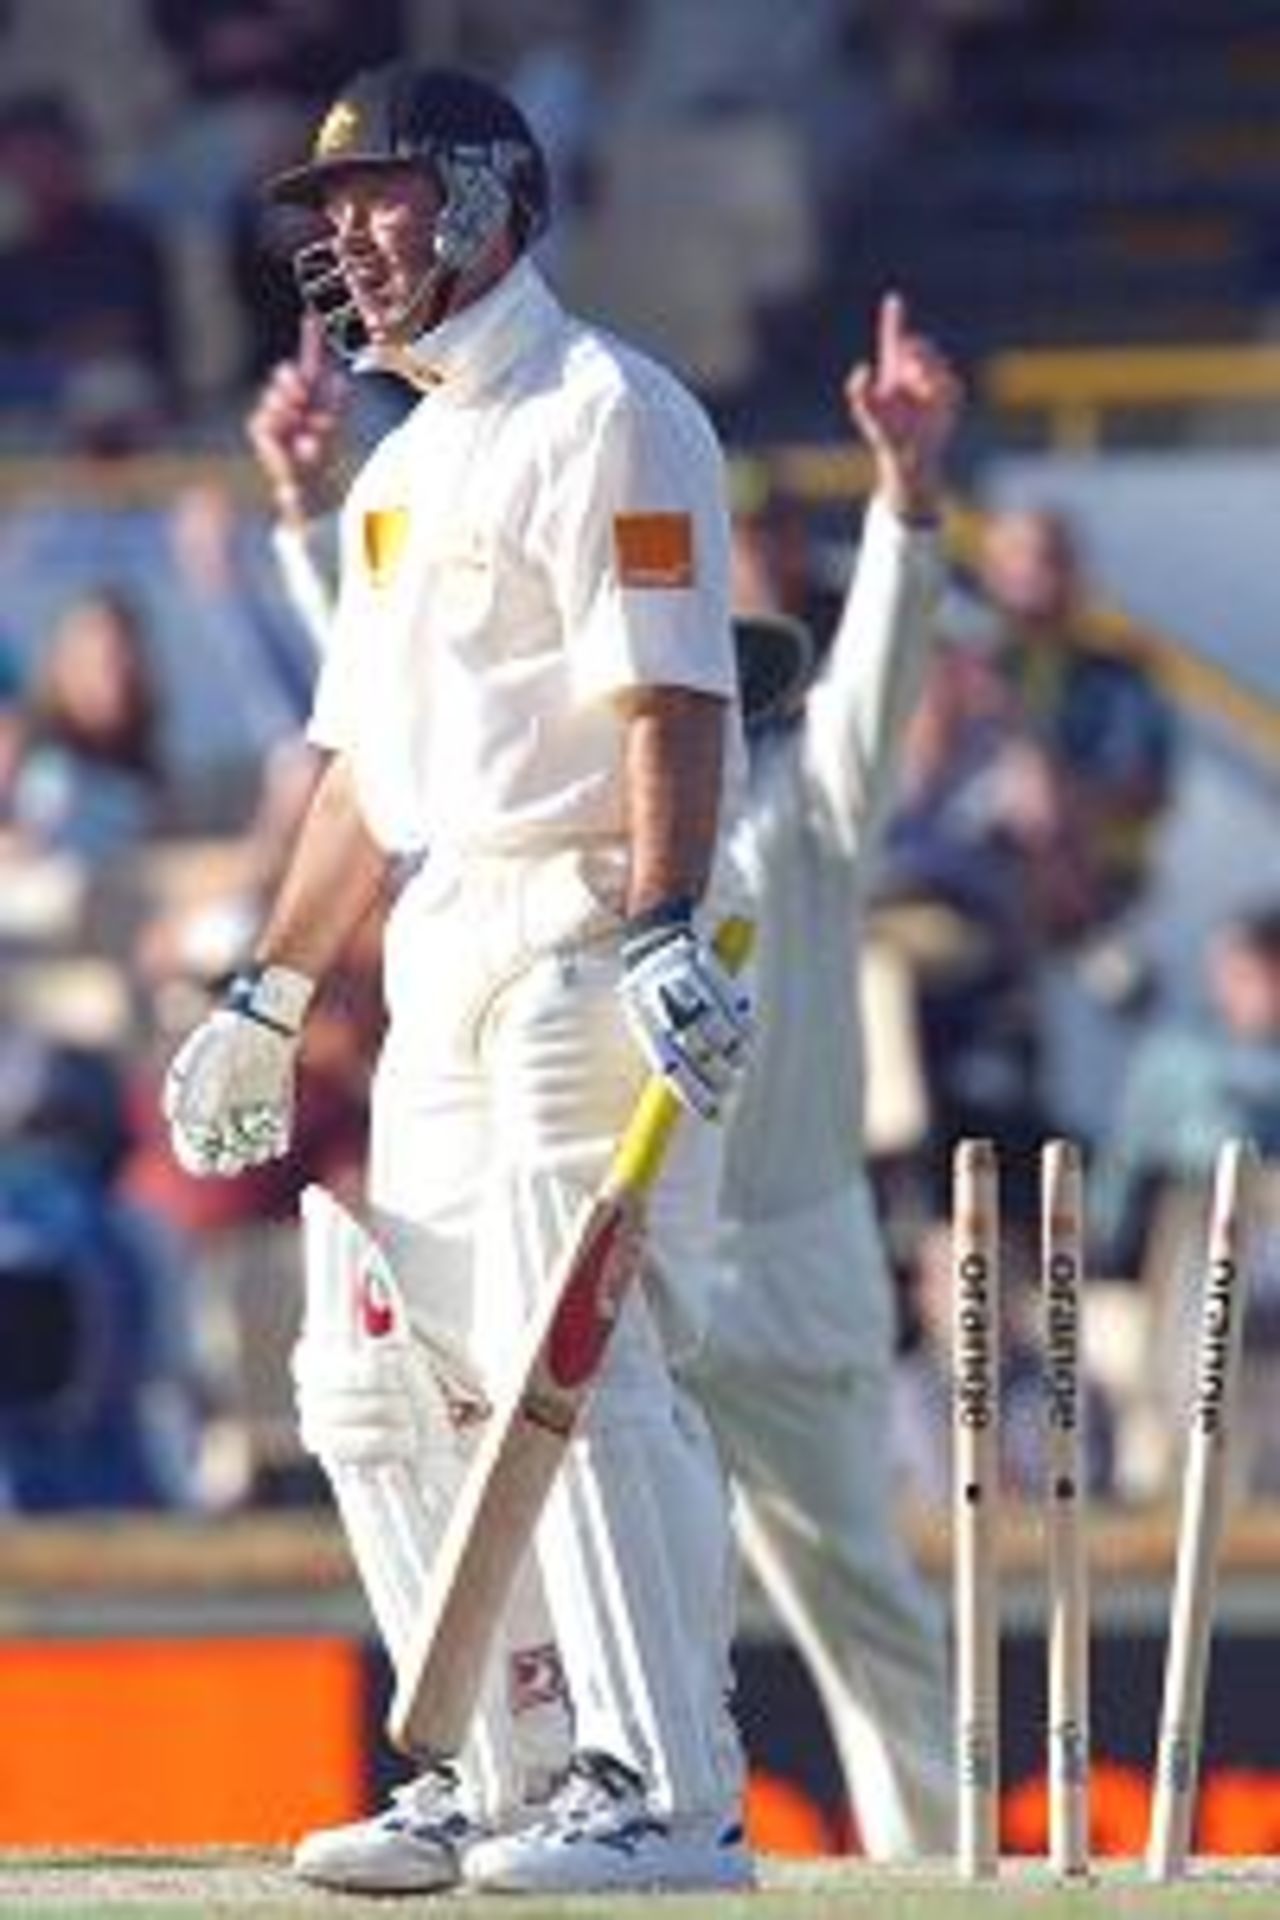 03 Dec 2001: Ricky Ponting for Australia is clean bowled by Chris Cairns for New Zealand during day 4 of the third Orange Test being played at the WACA ground Perth, Australia.